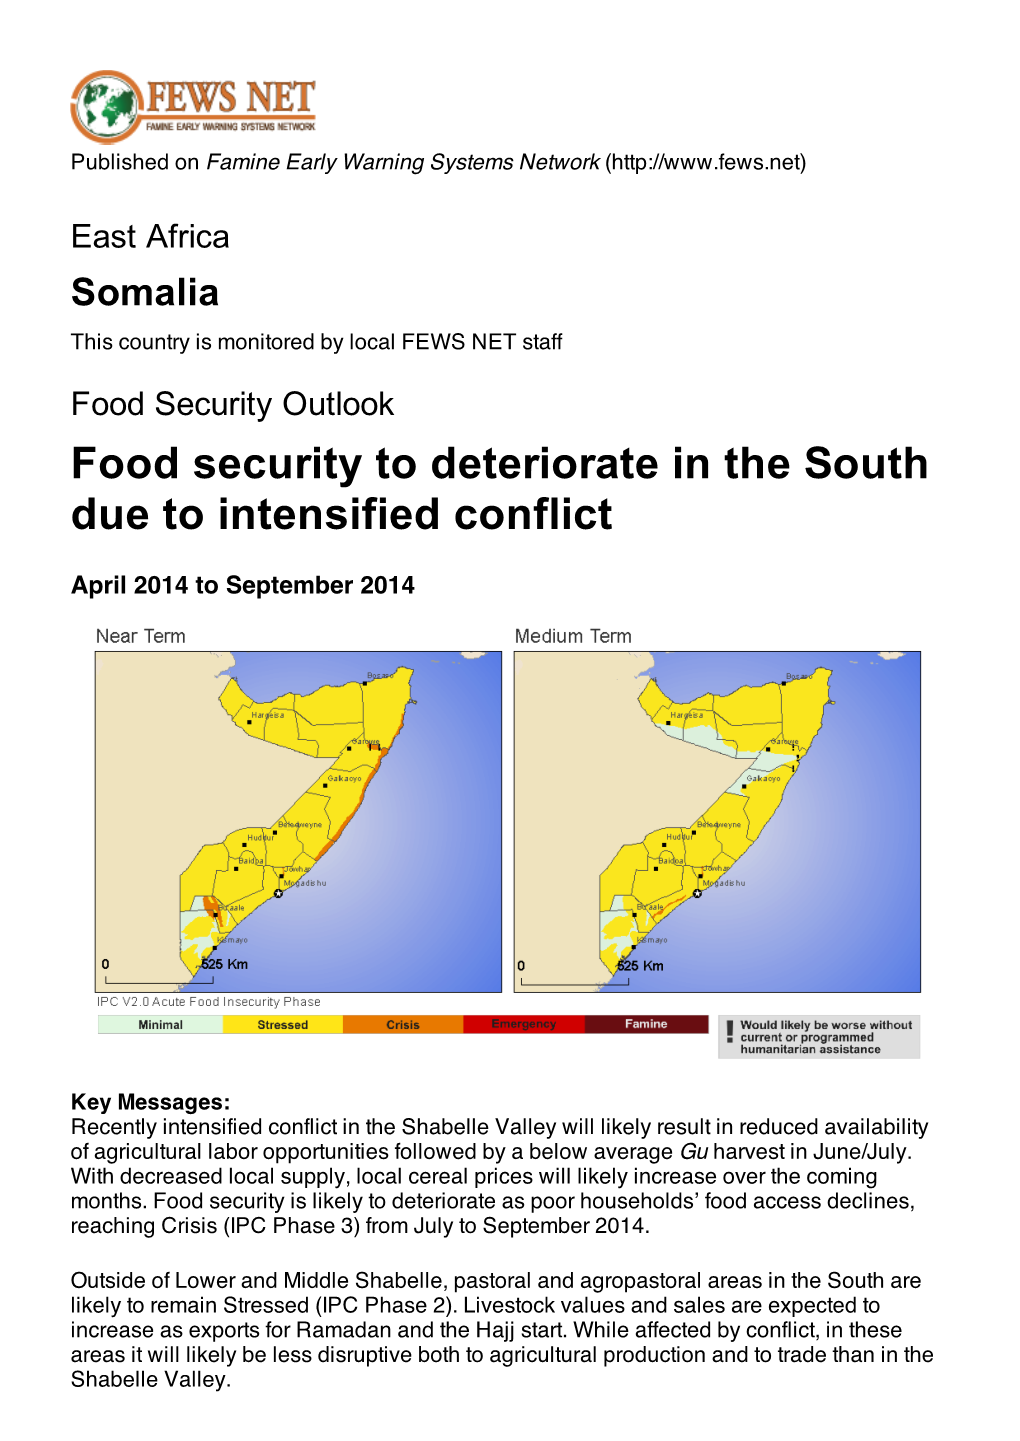 Food Security to Deteriorate in the South Due to Intensified Conflict